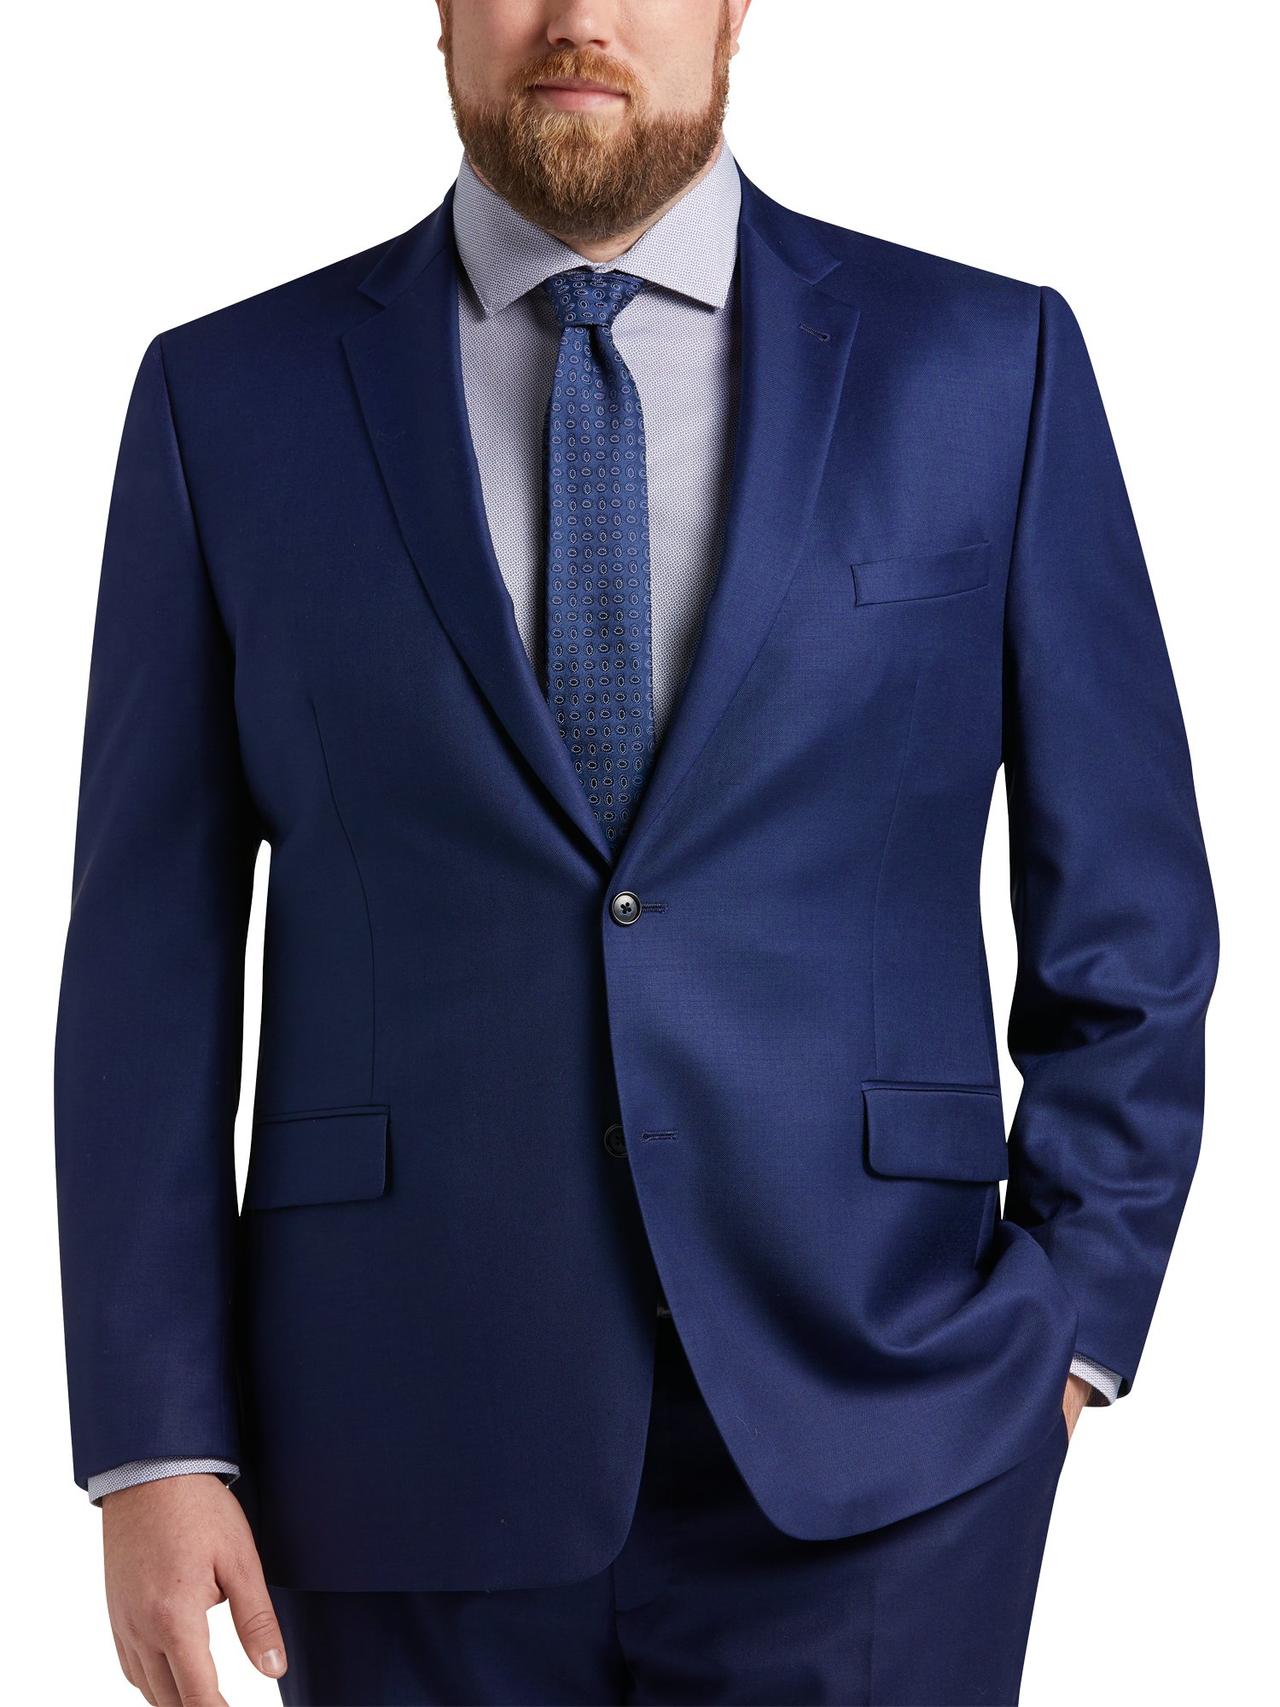 The Not-So-Standard Blue Suit Made for Summer Weddings